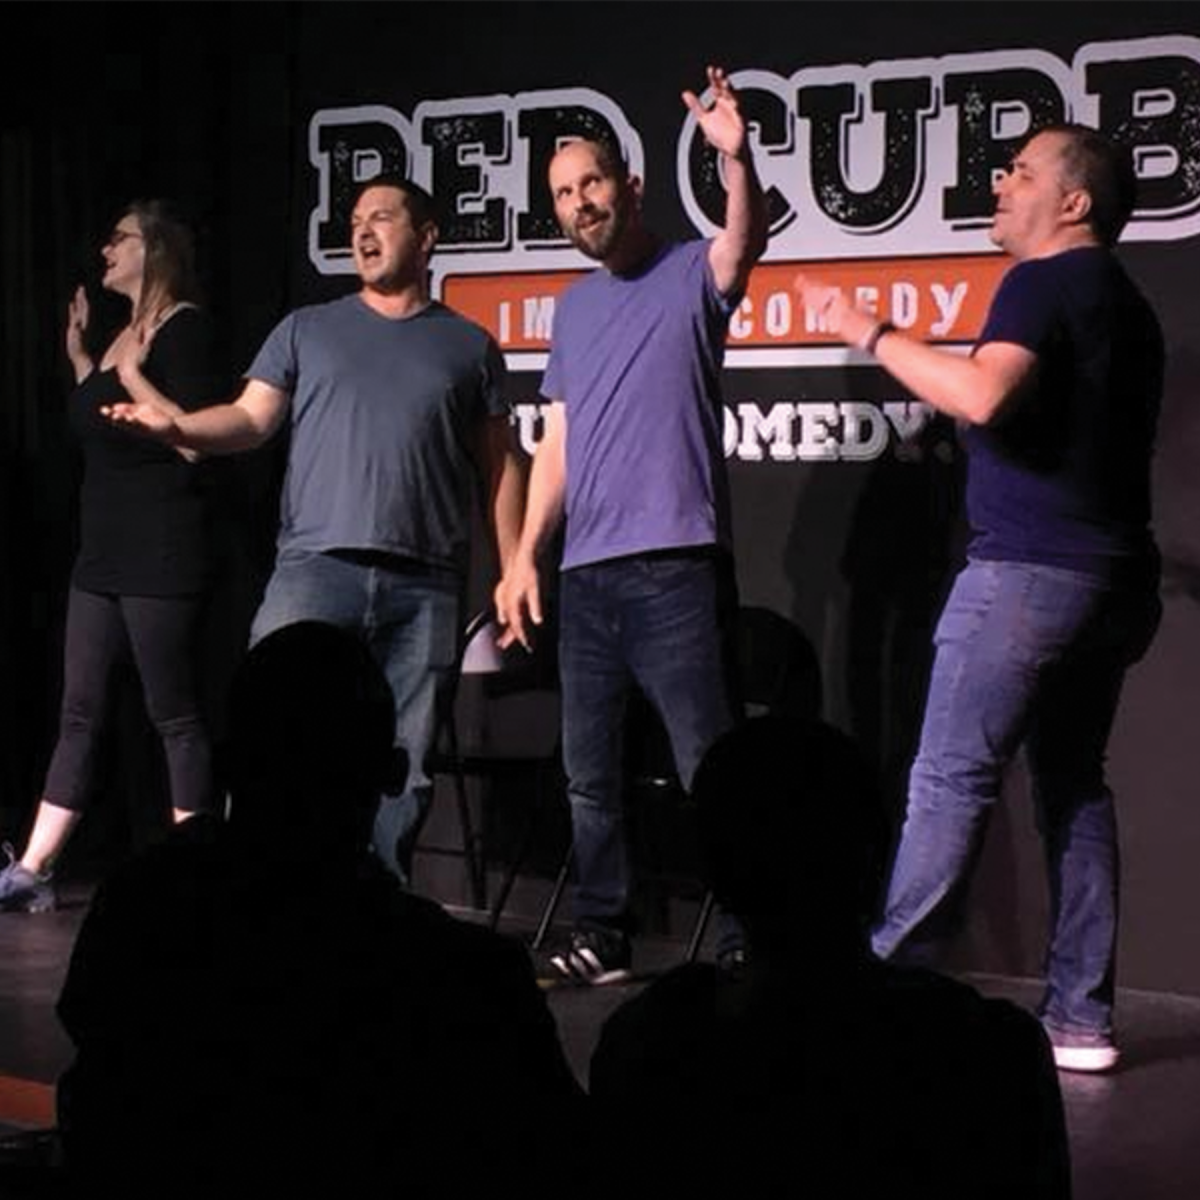 2022 Holiday Gift Guide: Red Curb Improv Comedy